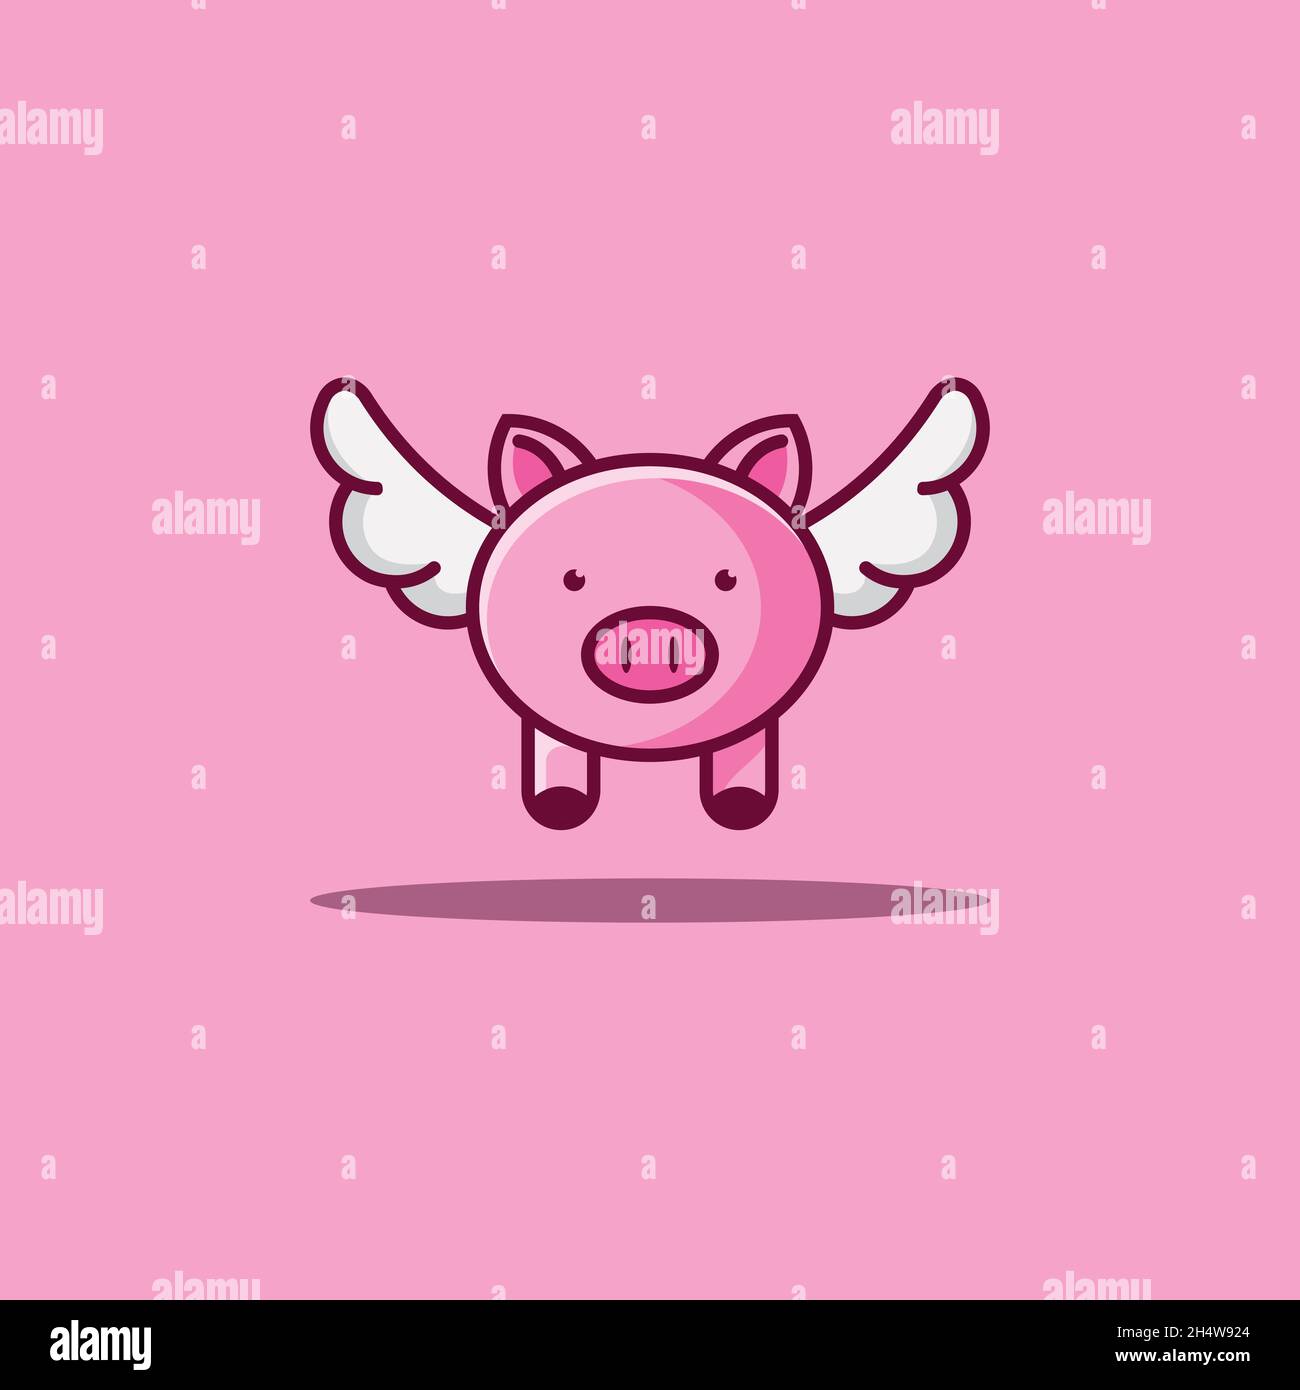 vector design. logo shape like a pink pig fly with cute face. Stock Vector